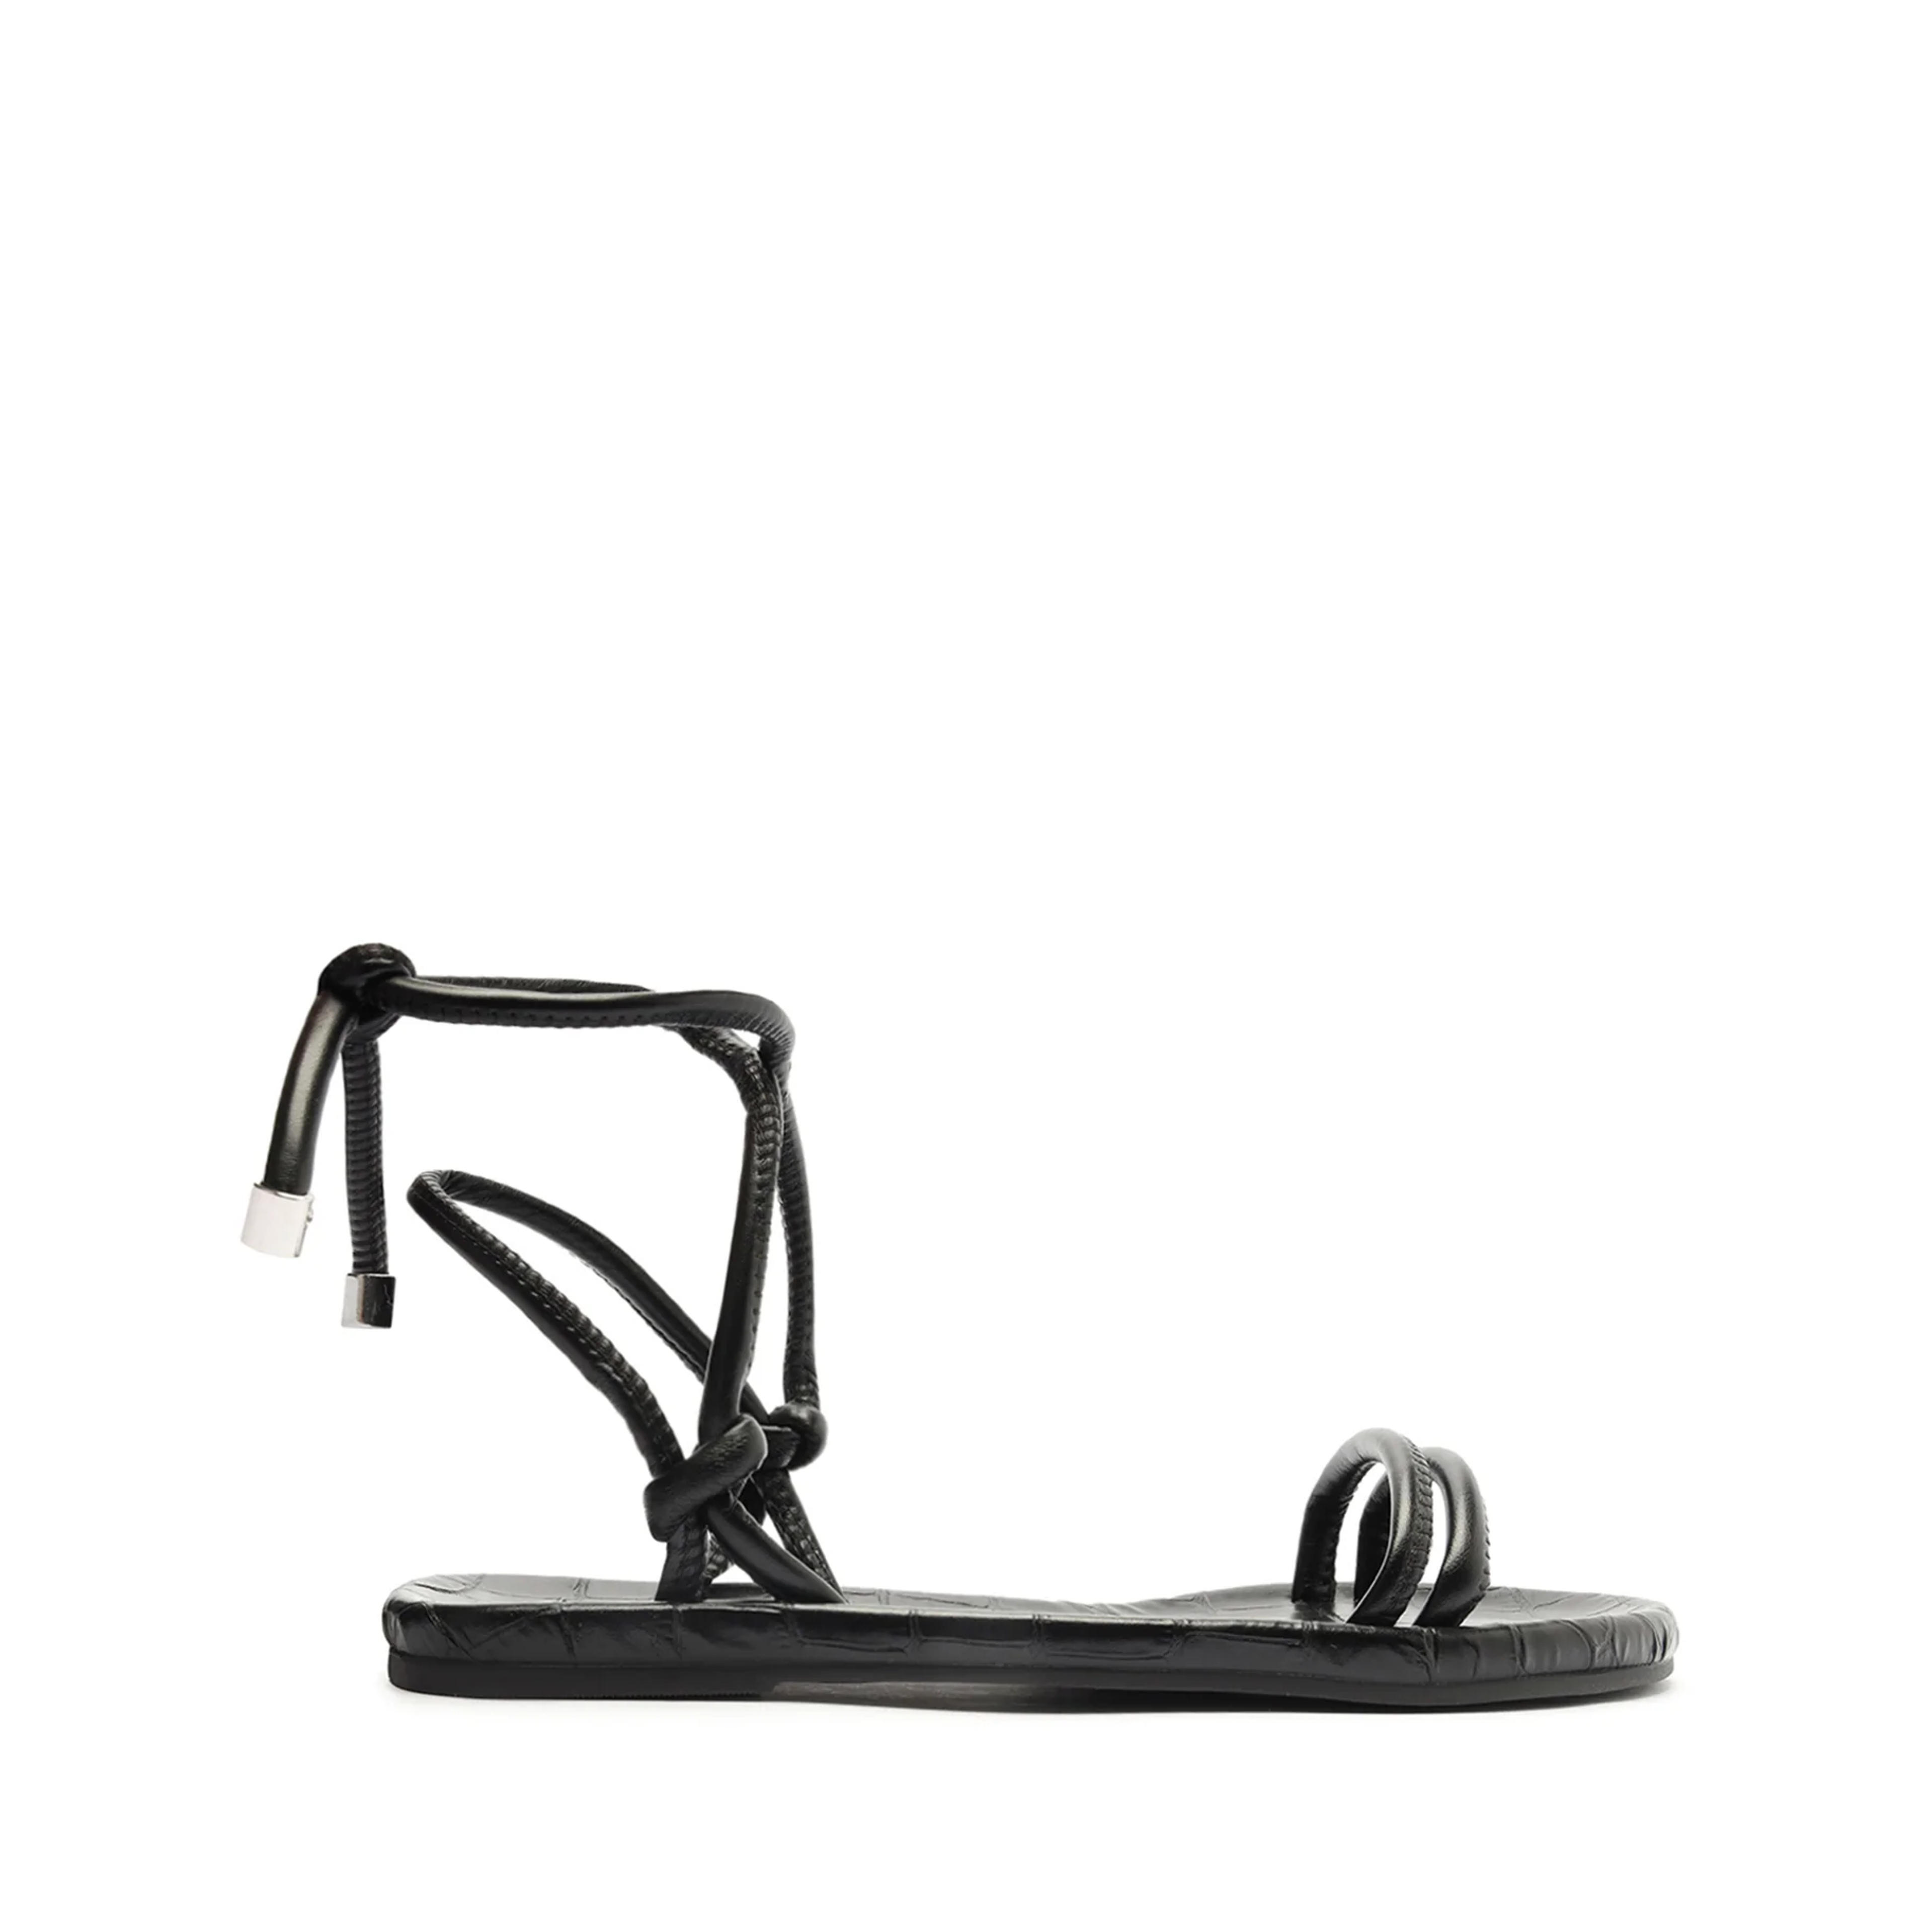 Nity Leather Sandal - 11 / Black / Faux Leather